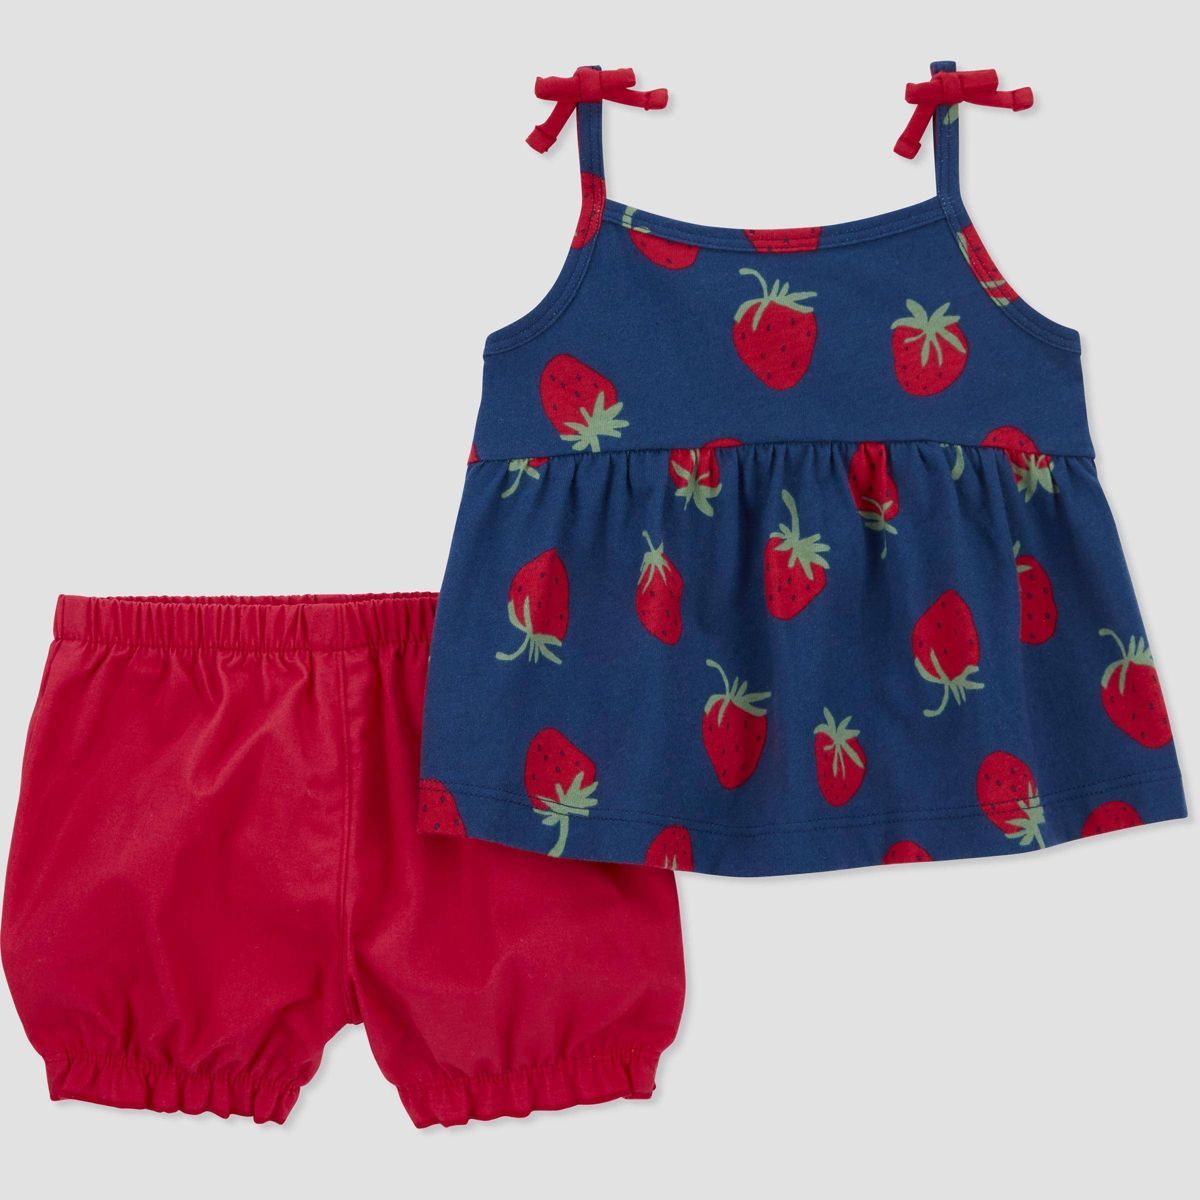 Carter's Just One You® Baby Girls' Strawberry Top & Bottom Set - Navy Blue/Red | Target